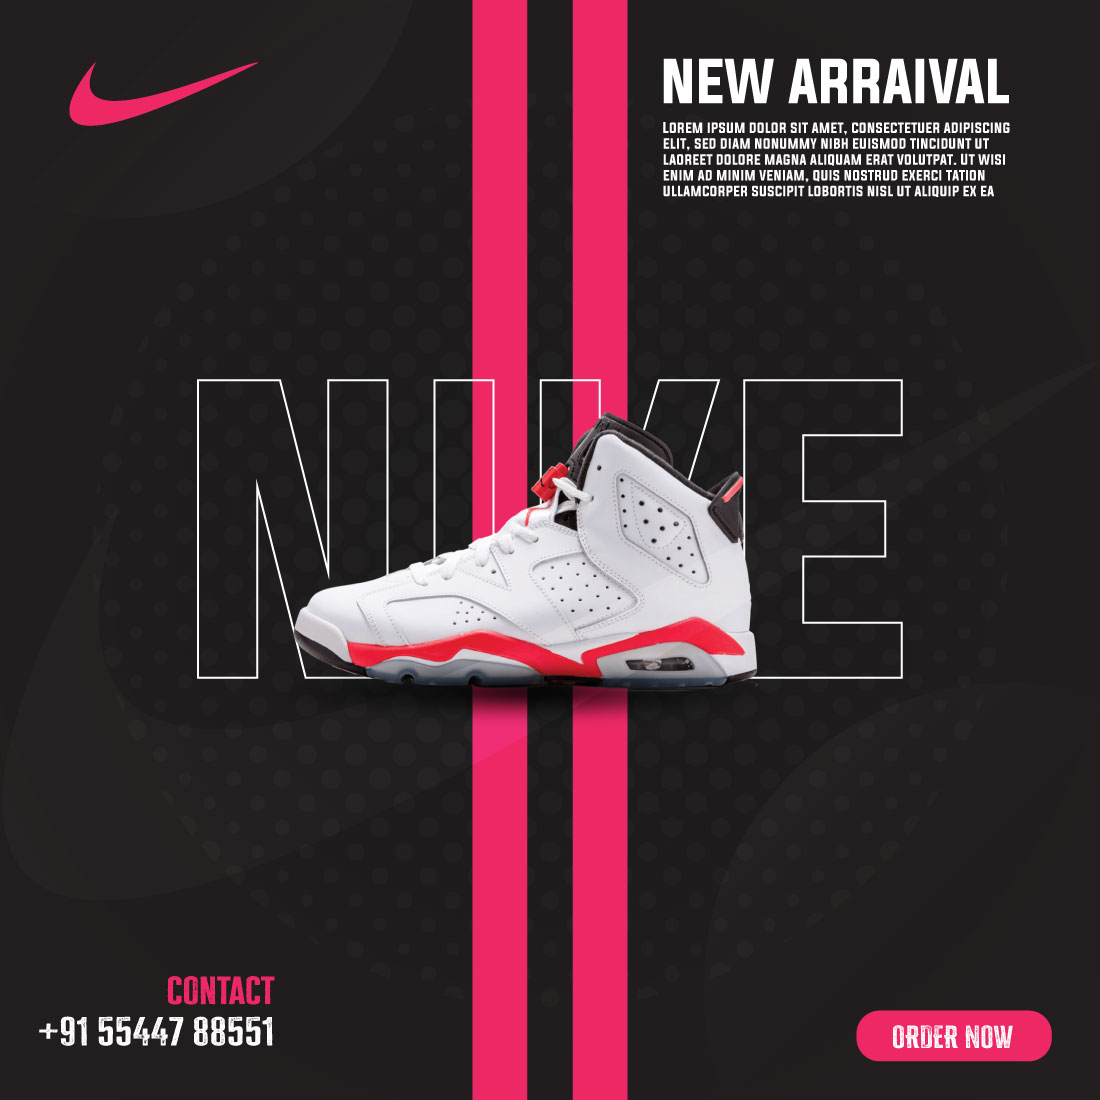 Nike Shoes Social Media Post preview image.